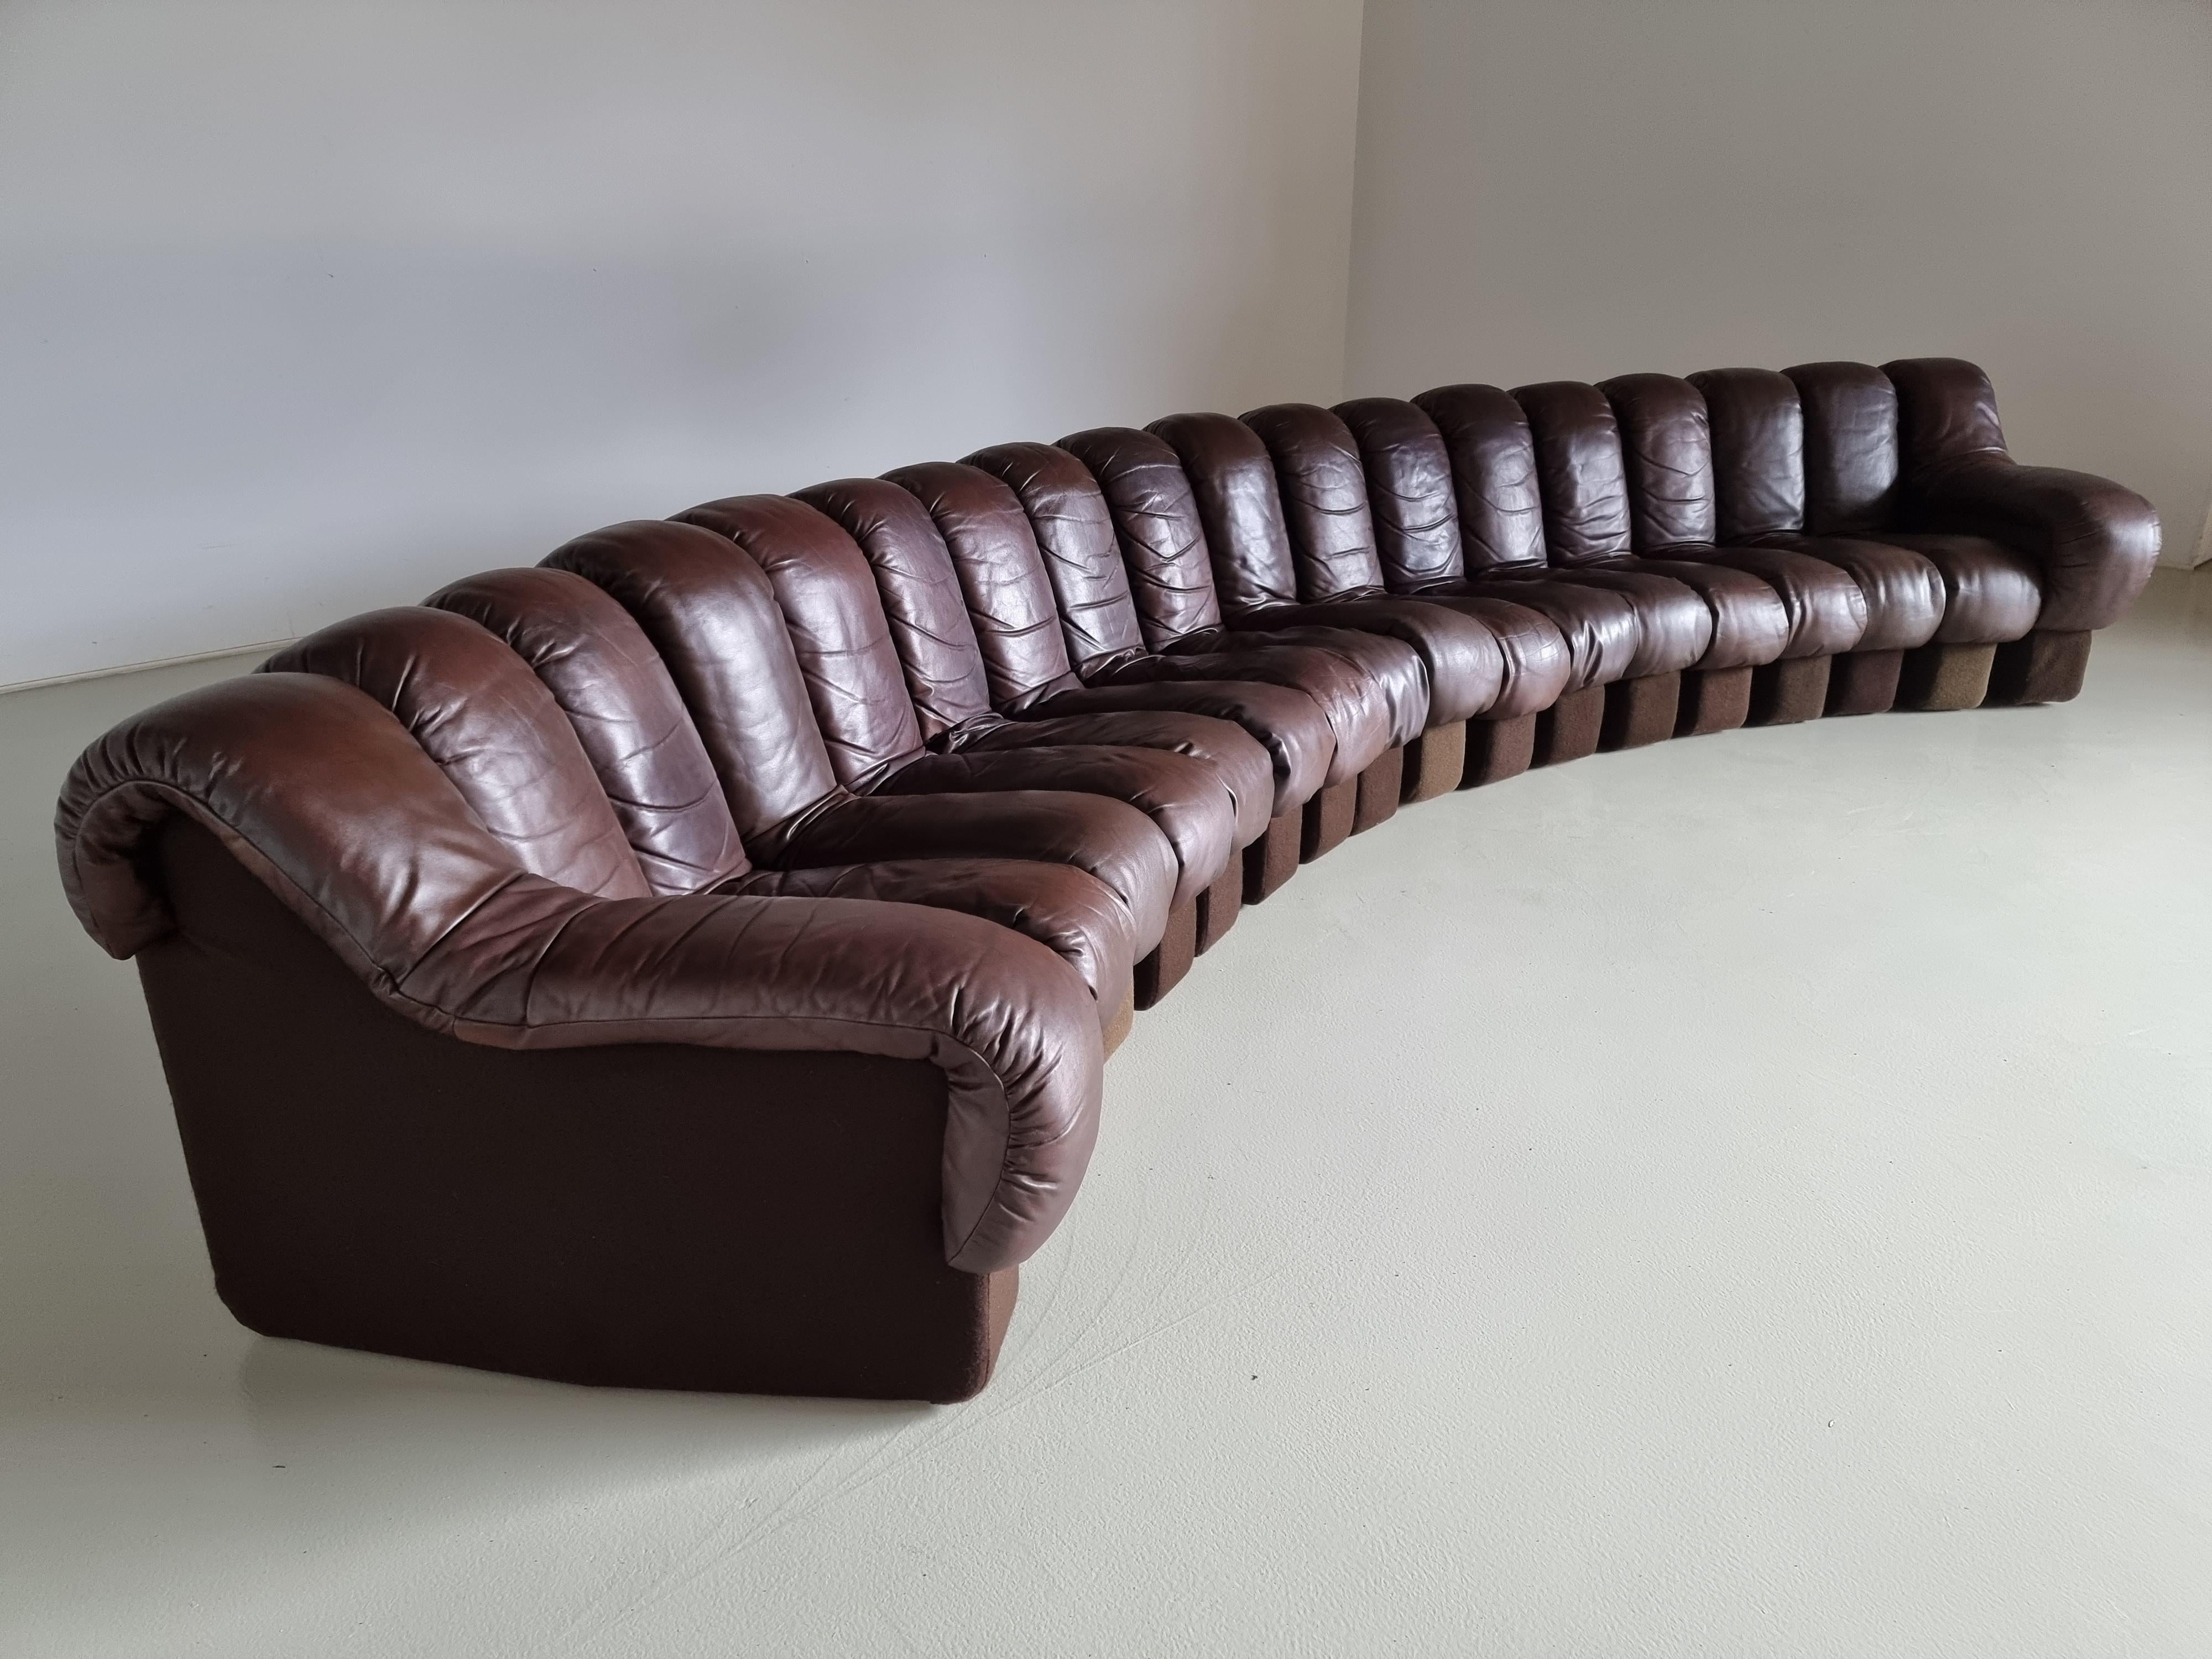 De Sede, DS600, 1970s.

This De Sede sofa in stunning patinated brown leather is designed by Ueli Bergere, Elenora Peduzzi-Riva, Heinz Ulrich, and Klaus Vogt. This sectional sofa contains 18 seating pieces with two armrests. The pieces can be